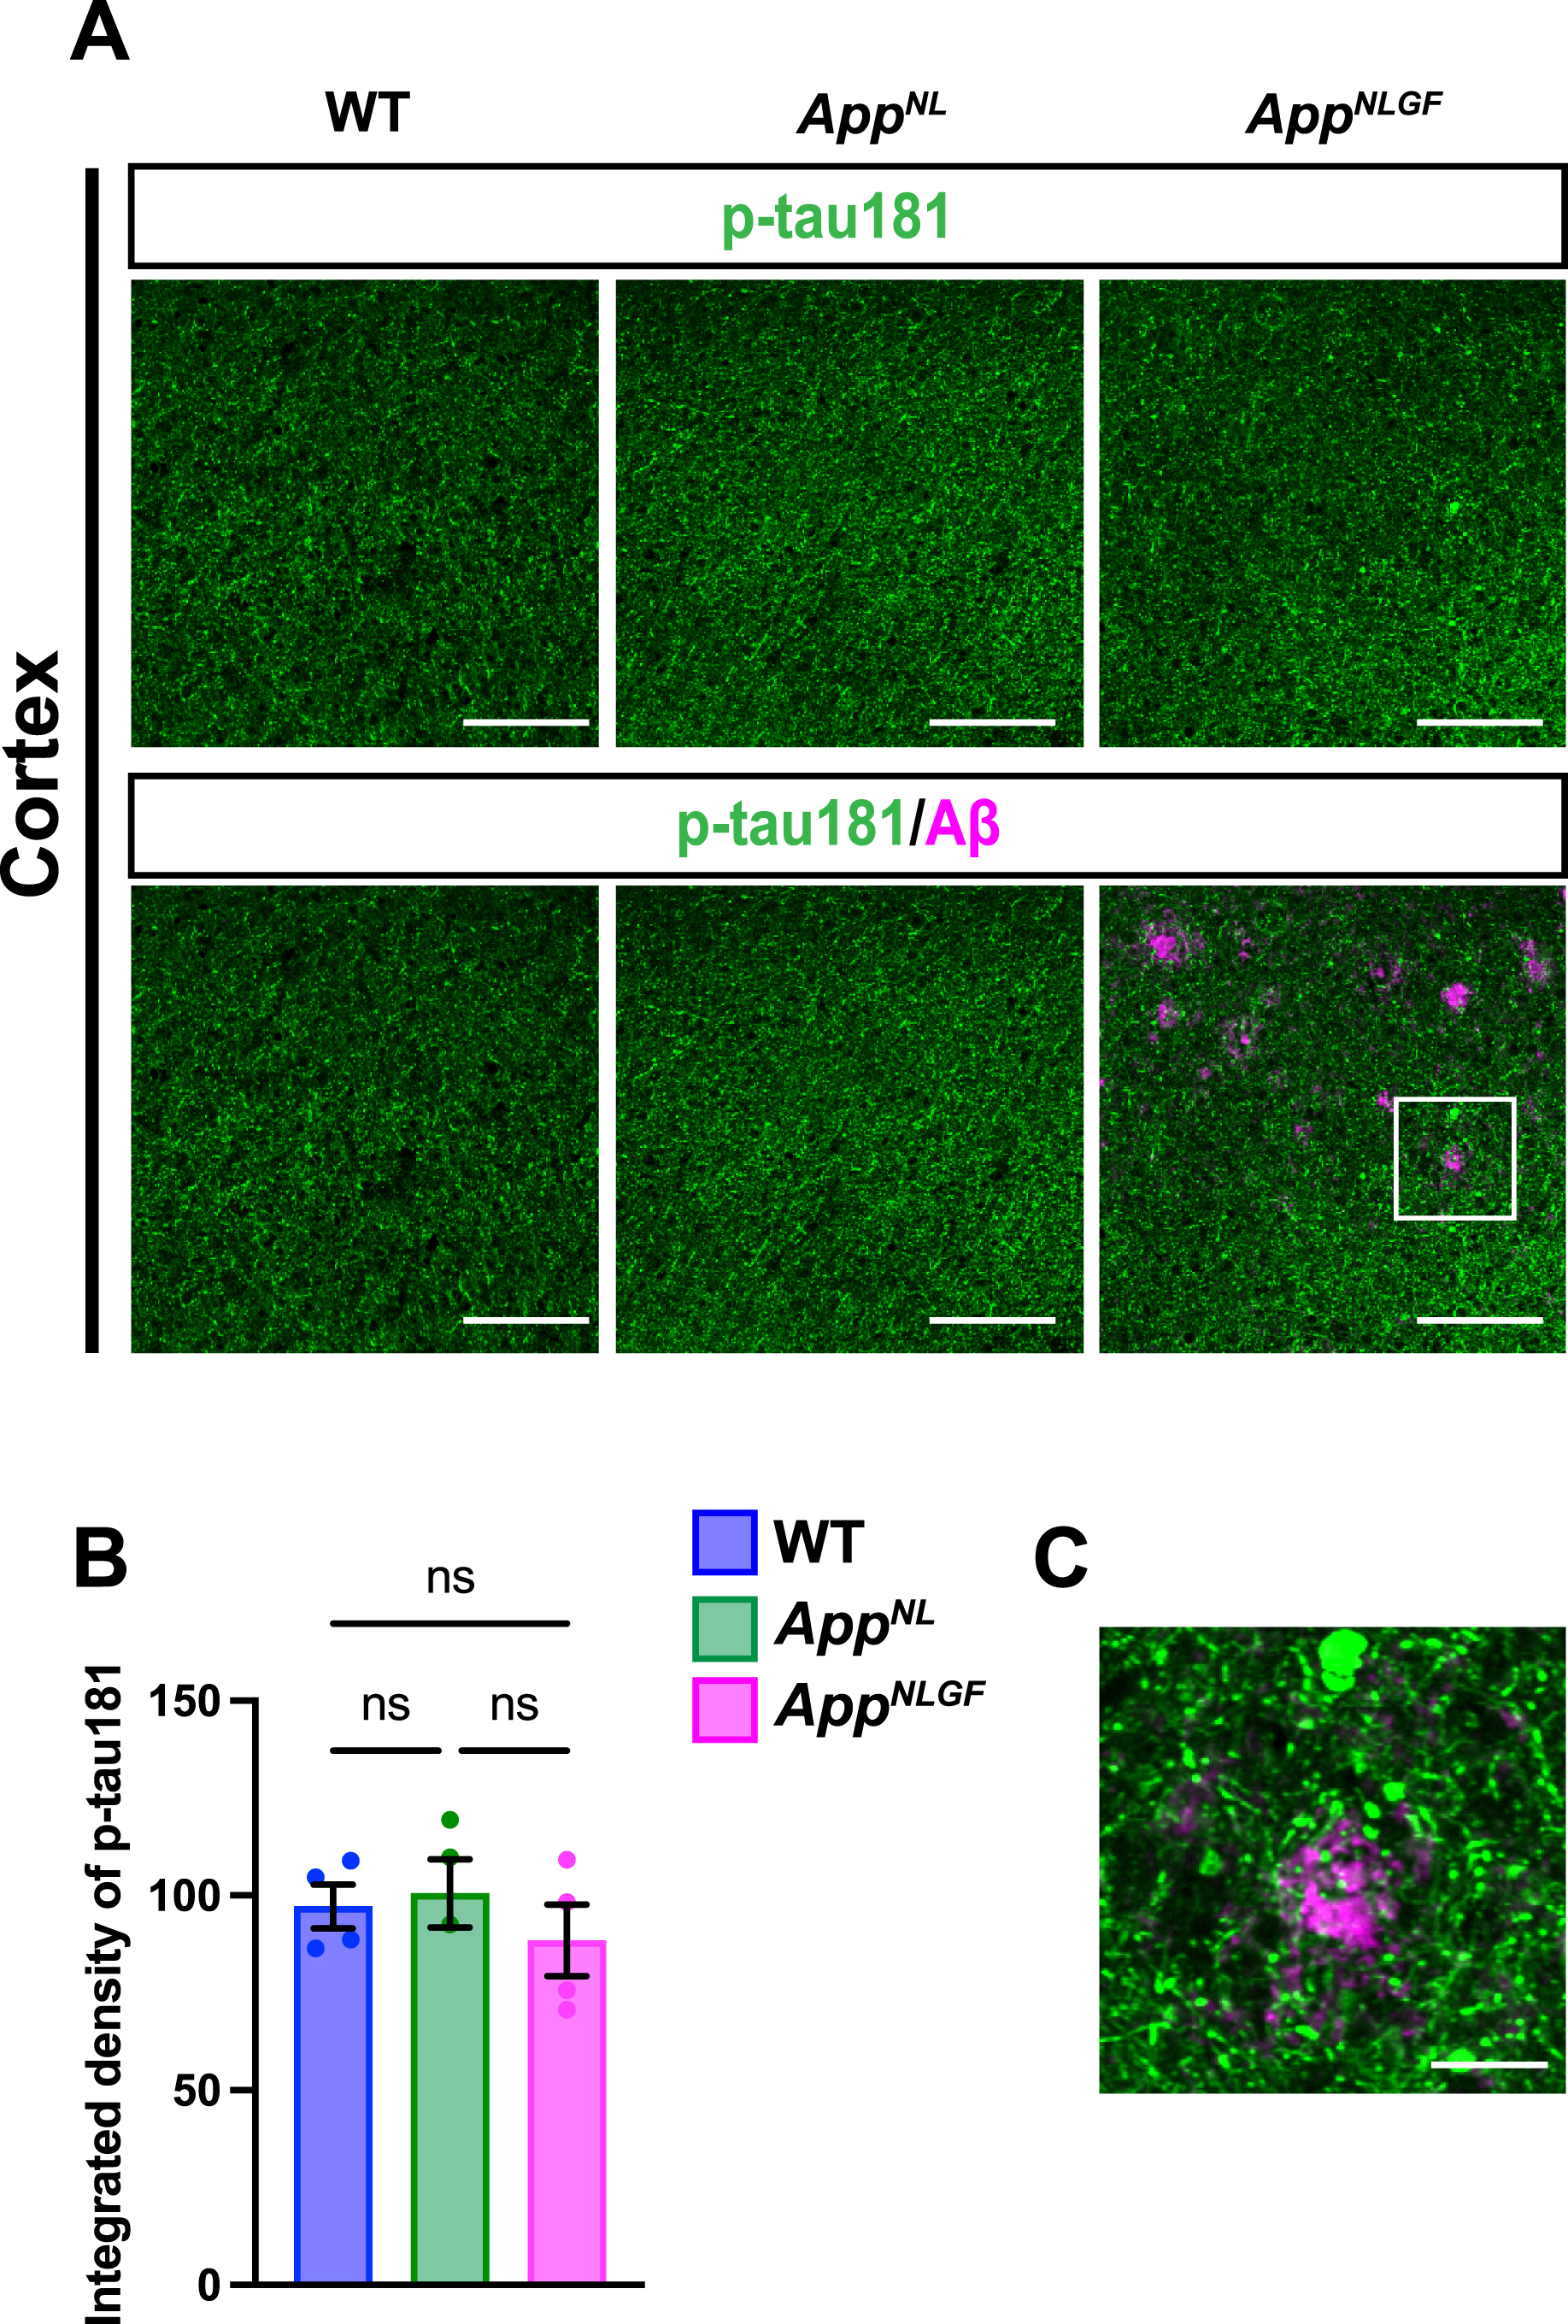 The density of p-tau181 signals is not significantly reduced in the cortex of AppNLGF mice. (A) Representative images of the cortex from frozen coronal brain sections immunostained with antibodies against p-tau181 (green) and Aβ (magenta). Scale bars, 100μm. (B) P-tau181 immunoreactivity was quantified and expressed as relative percentage to WT. n = 4 /group. ns; not significant. (C) A higher magnification of framed region indicated in A. Scale bars, 20μm.